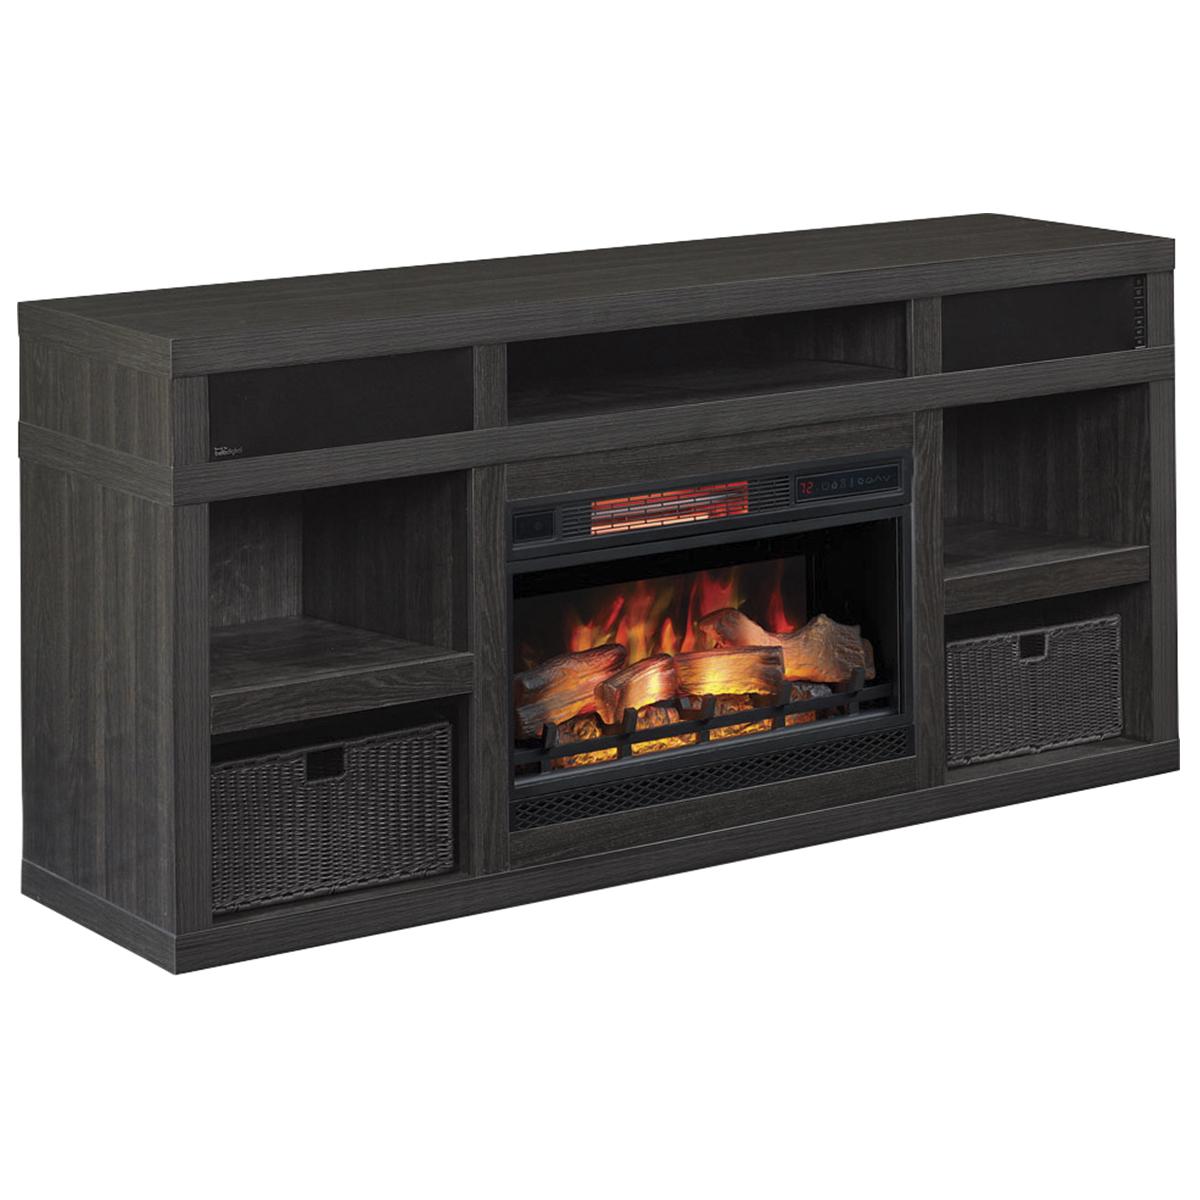 Off White Electric Fireplace Best Of Fabio Flames Greatlin 3 Piece Fireplace Entertainment Wall